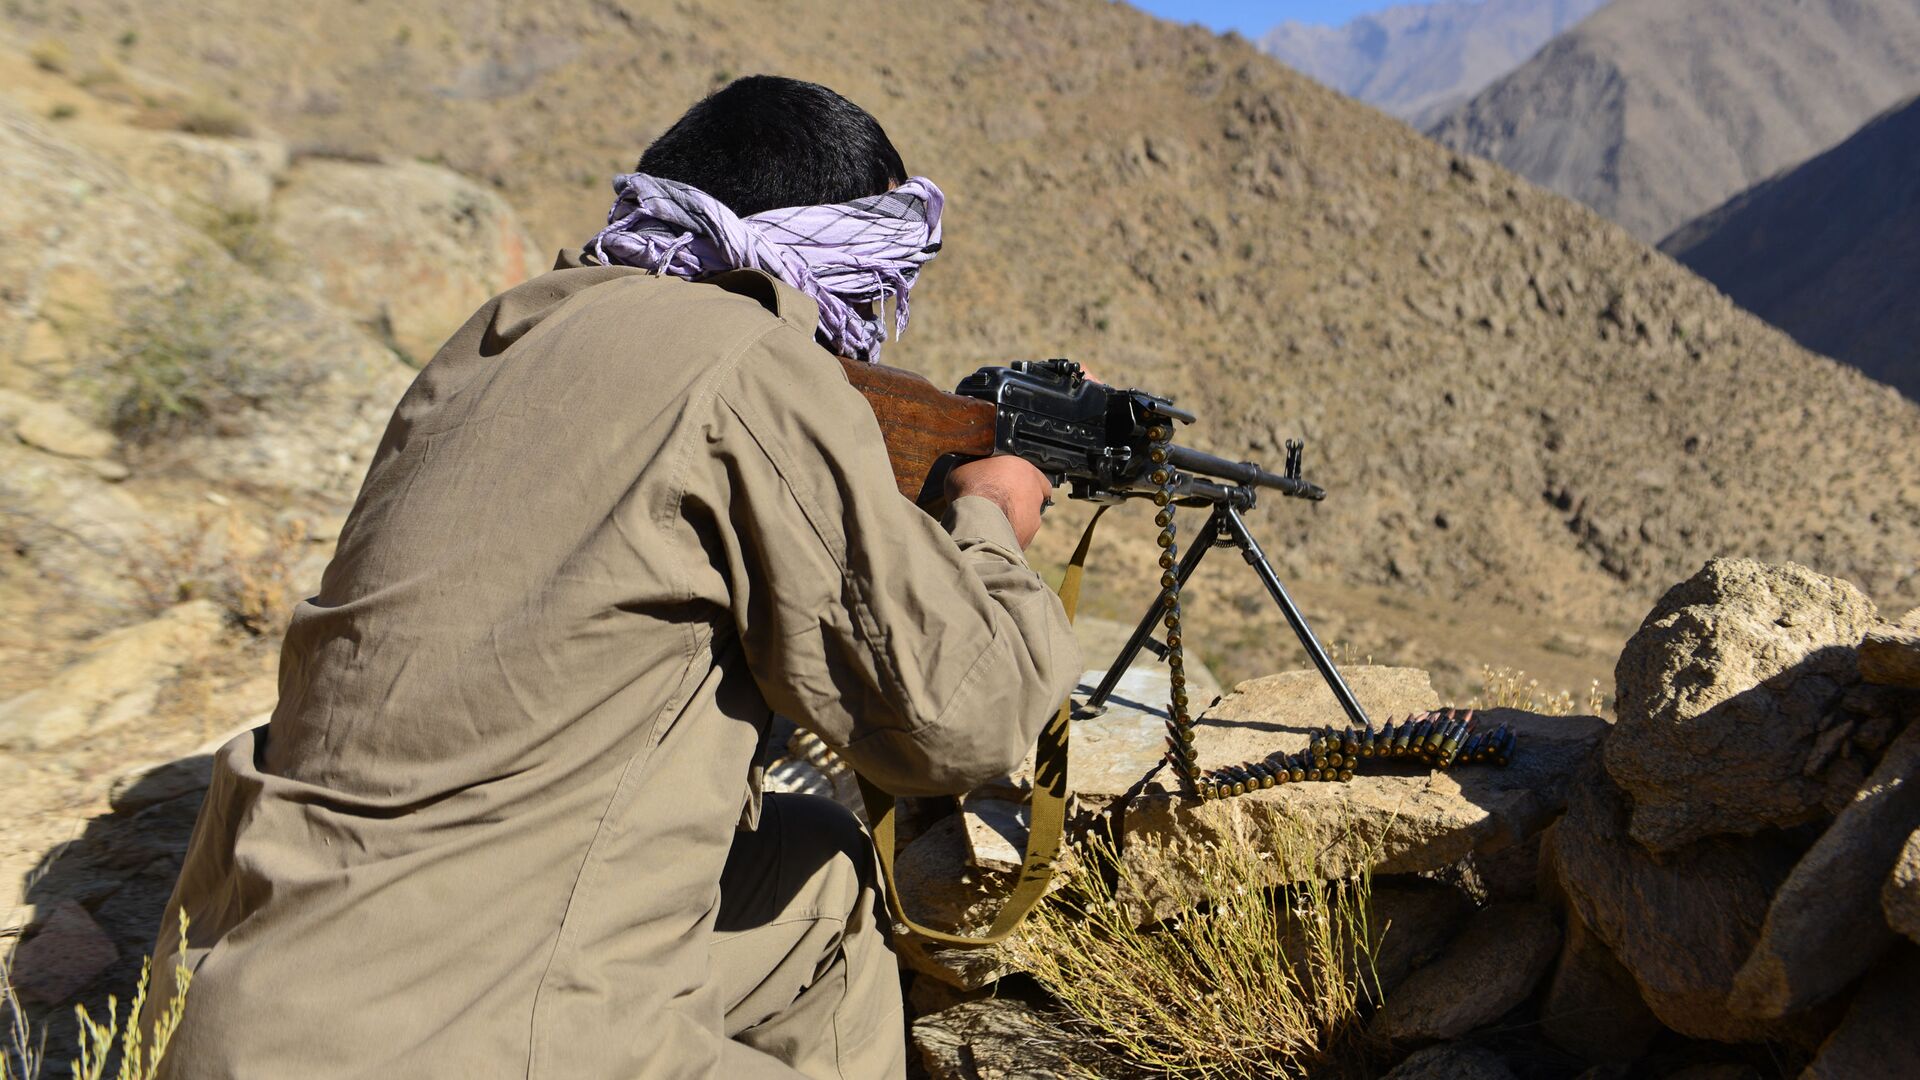 An Afghan resistance movement and anti-Taliban uprising forces personnel takes part in a military training at Malimah area of Dara district in Panjshir province on September 2, 2021 as the valley remains the last major holdout of anti-Taliban forces. - Sputnik Afrique, 1920, 08.01.2022